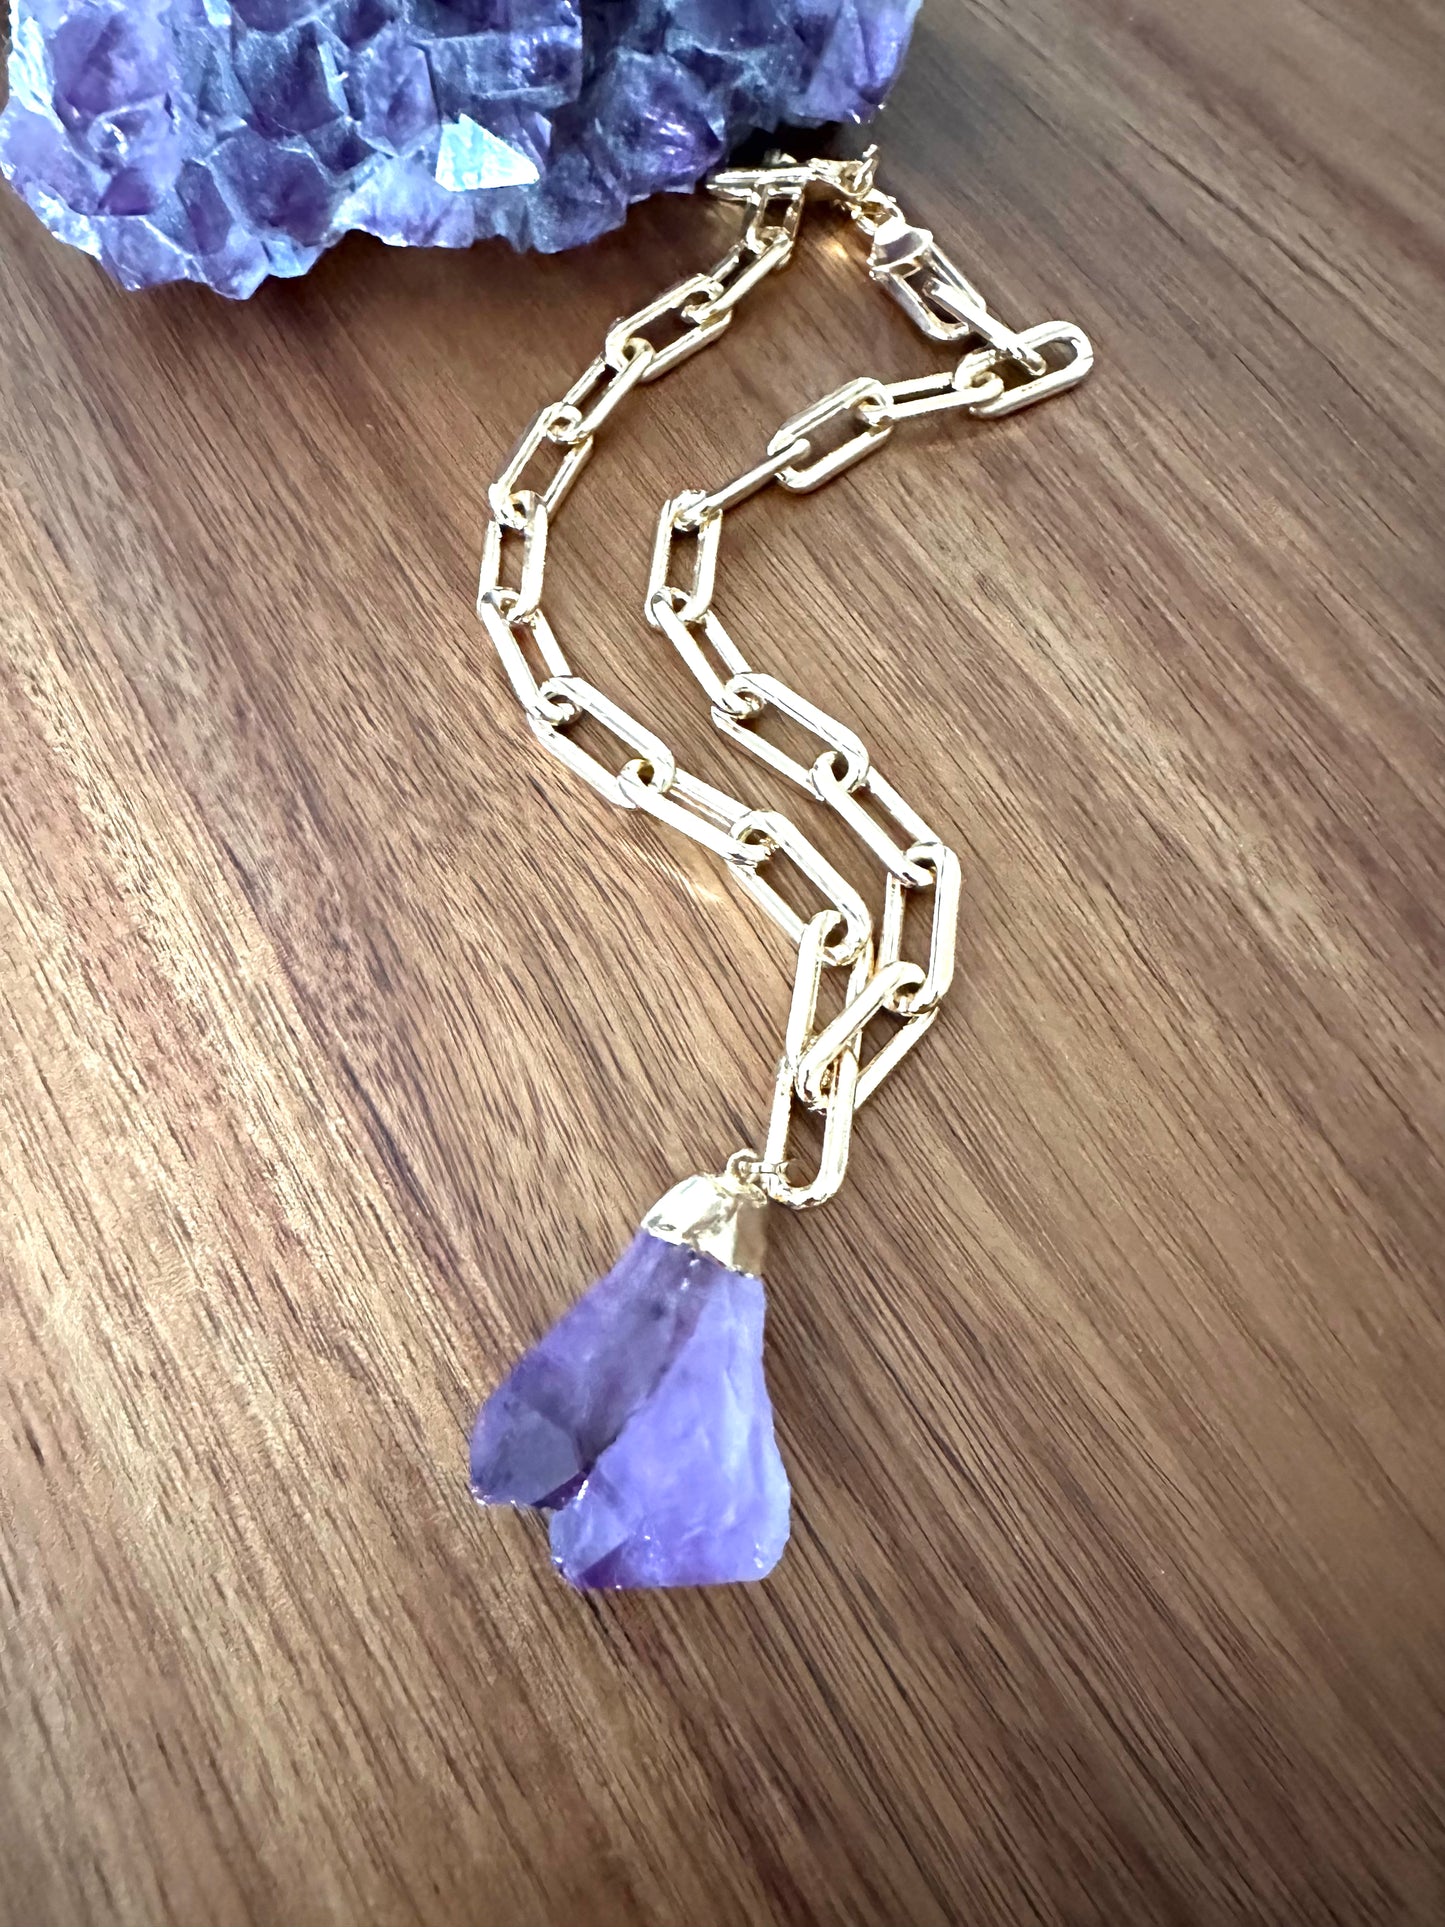  a large double pointed amethyst purple crystal pendant on a large gold chain on a wooden background. a large amethyst crystal sits at the top of the image